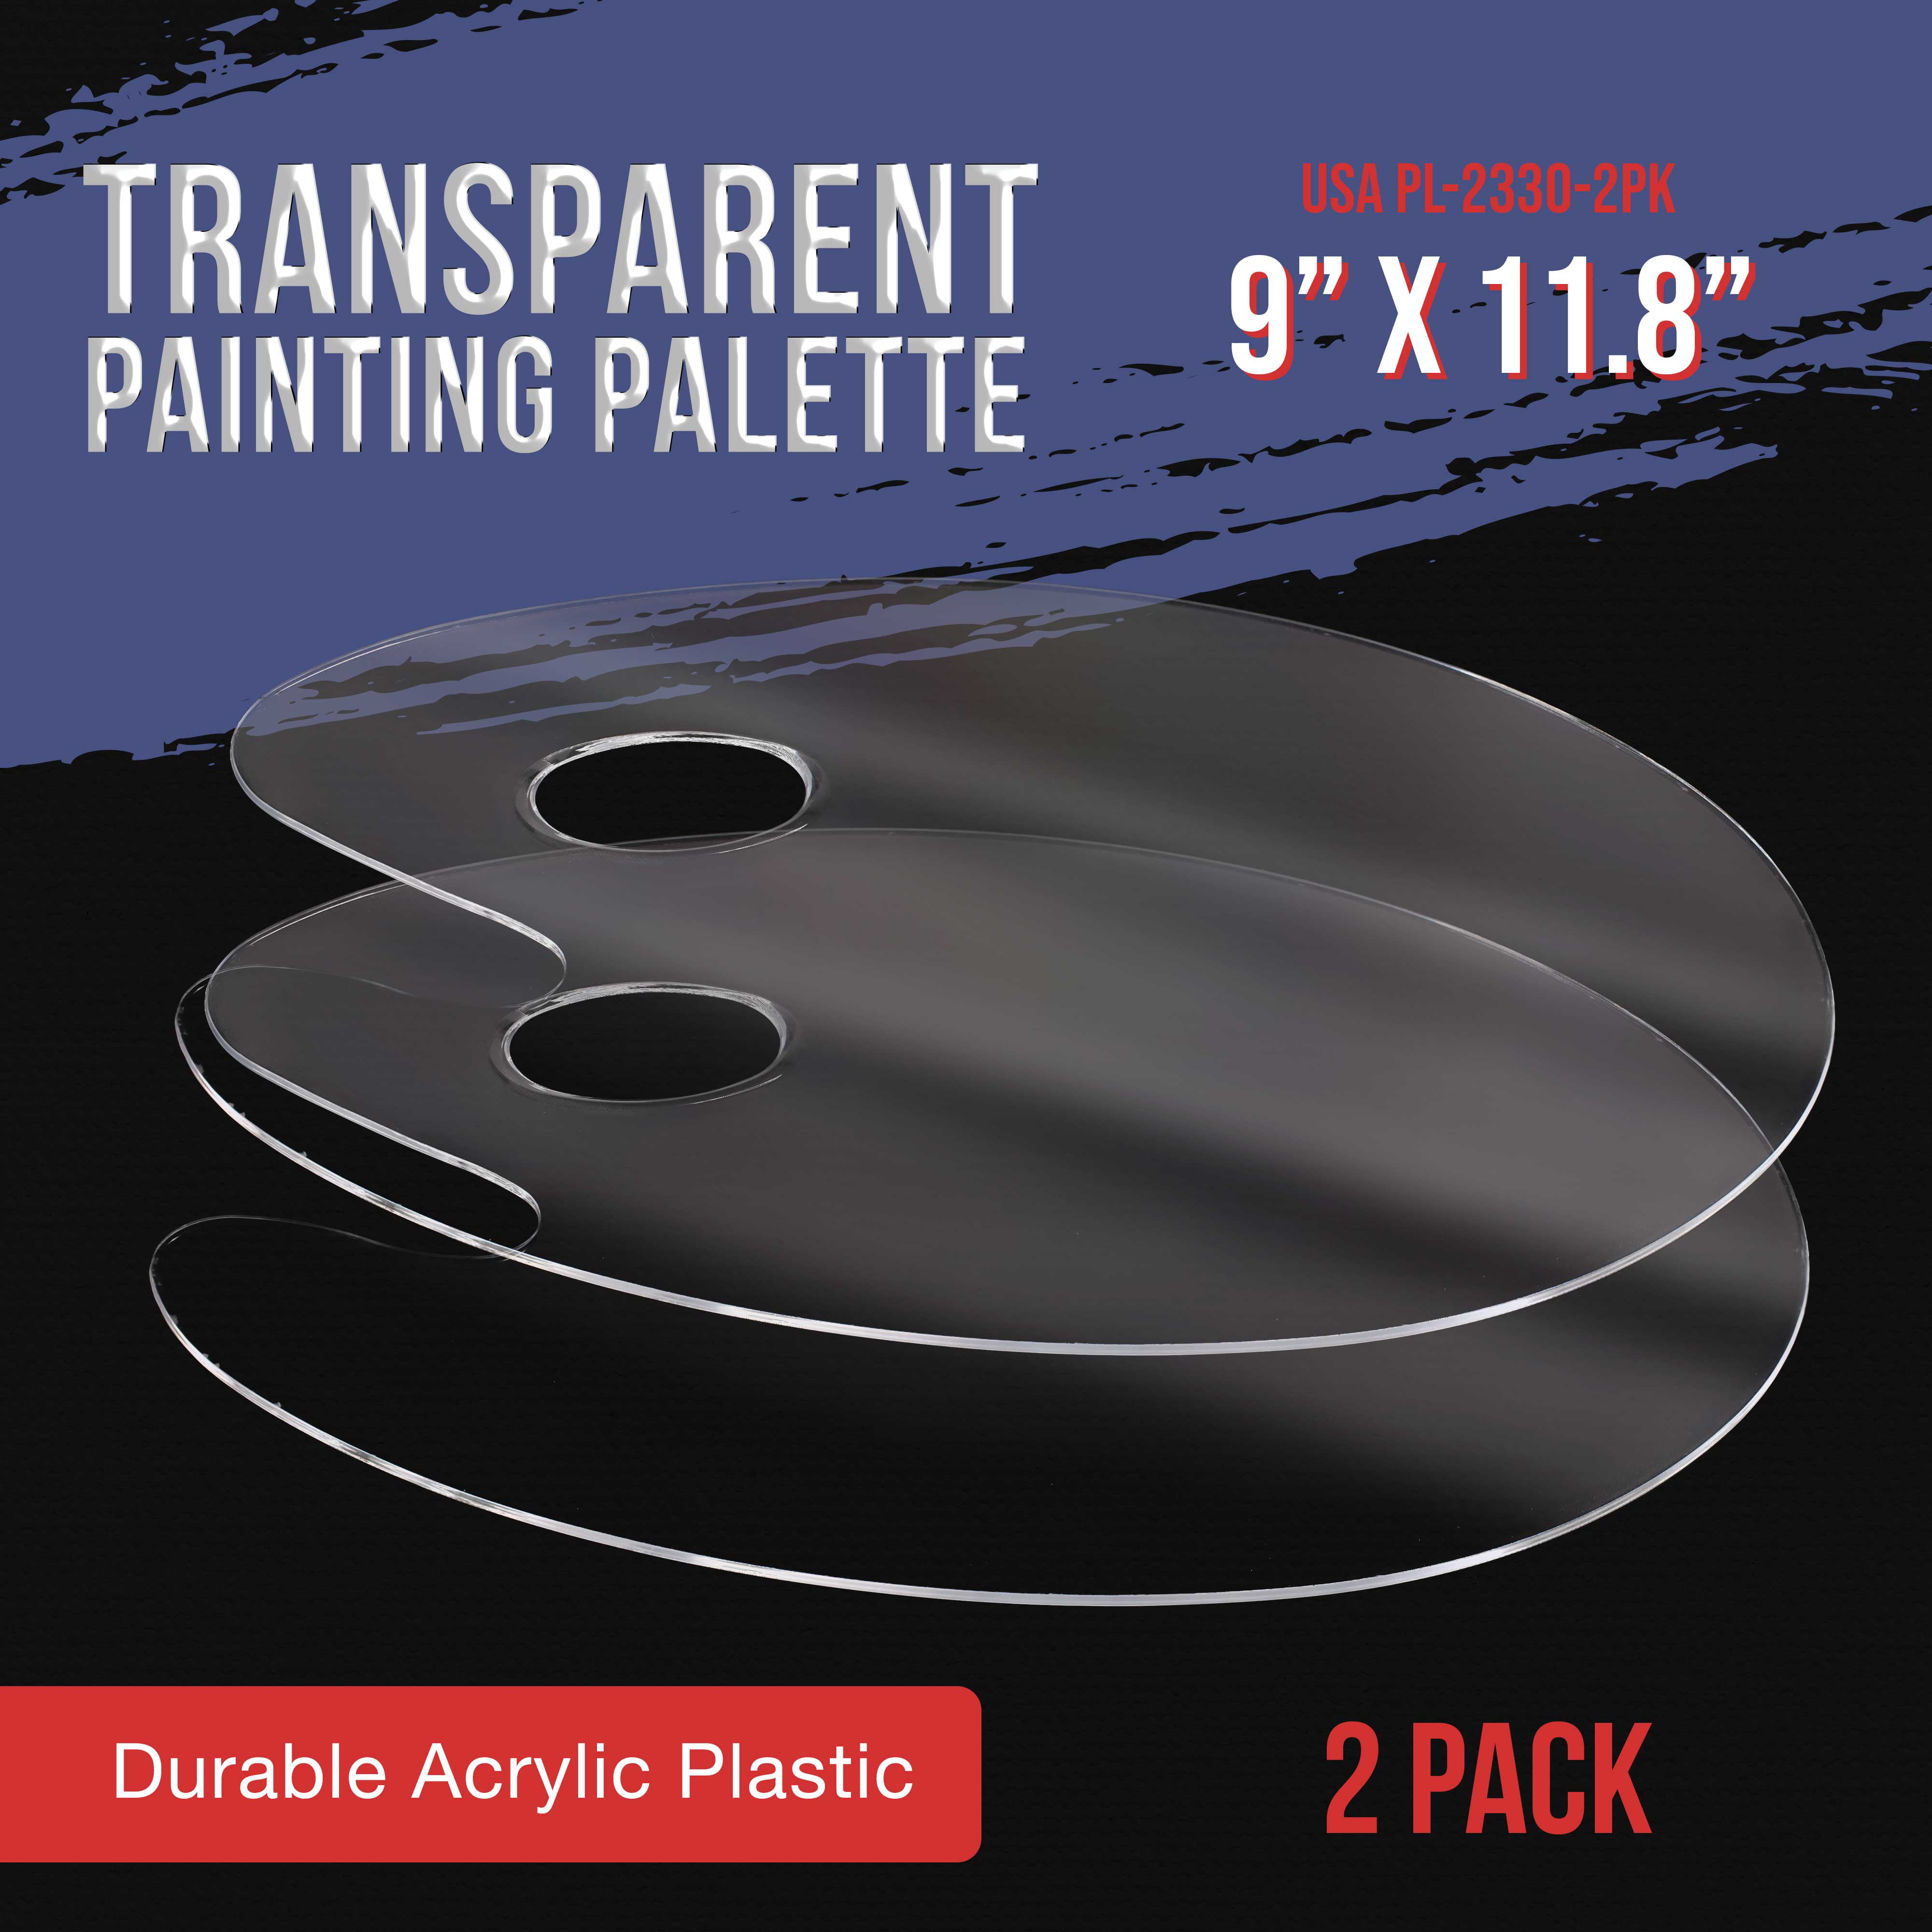 Acrylic Paint Palette 2pcs 11.8 x 7.9 inches with Thumb Hole by DUGATO,  Clear Oval-Shaped Non-Stick Acrylic Oil Paint Mixing Tray- Comfortable to  Hold